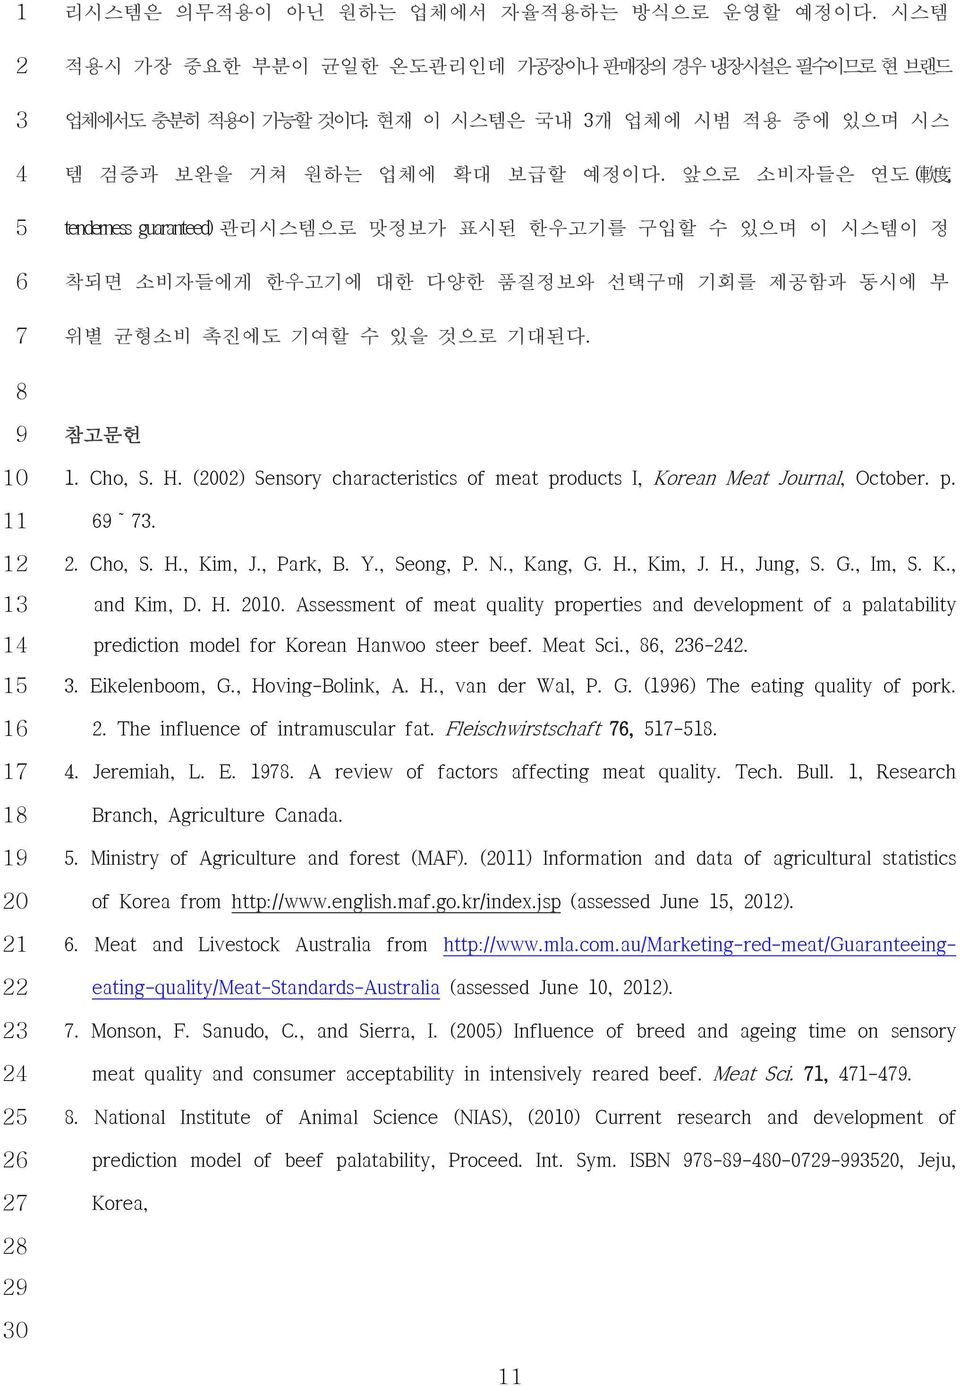 Cho, S. H. (00) Sensory characteristics of meat products I, Korean Meat Journal, October. p. ~.. Cho, S. H., Kim, J., Park, B. Y., Seong, P. N., Kang, G. H., Kim, J. H., Jung, S. G., Im, S. K., and Kim, D.